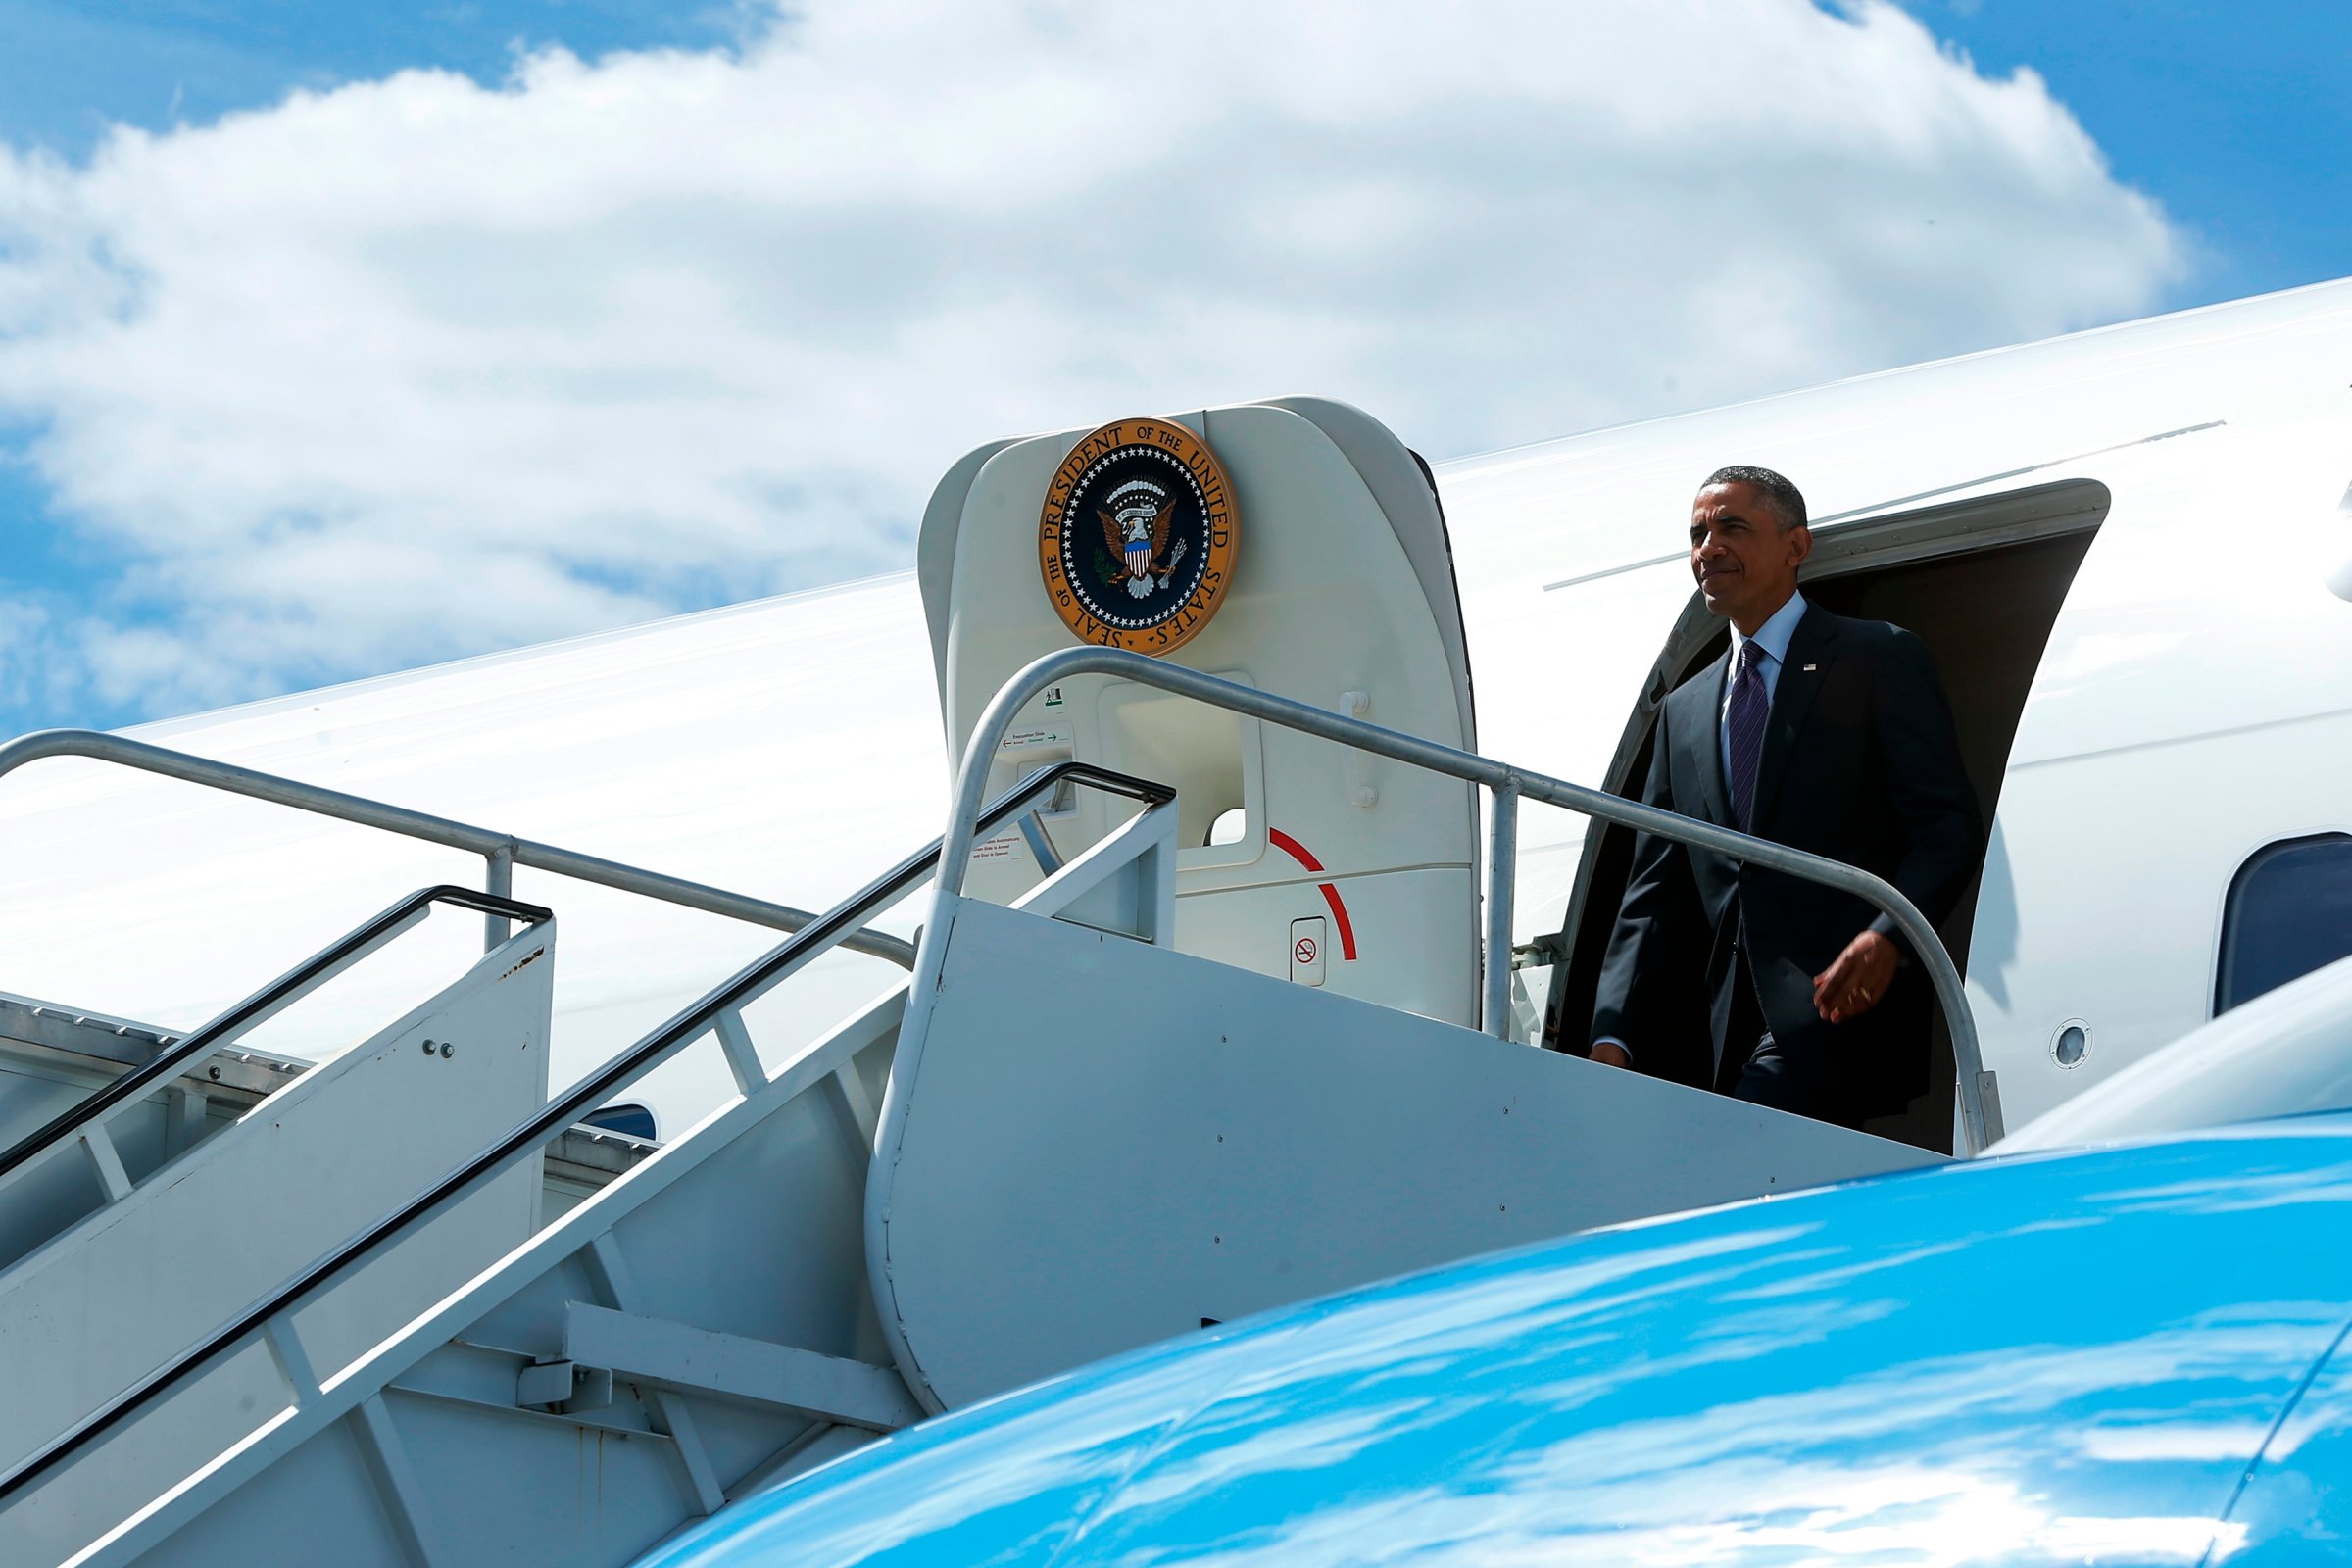 U.S. President Obama arrives onboard Air Force One at Westchester County Airport in White Plains, New York